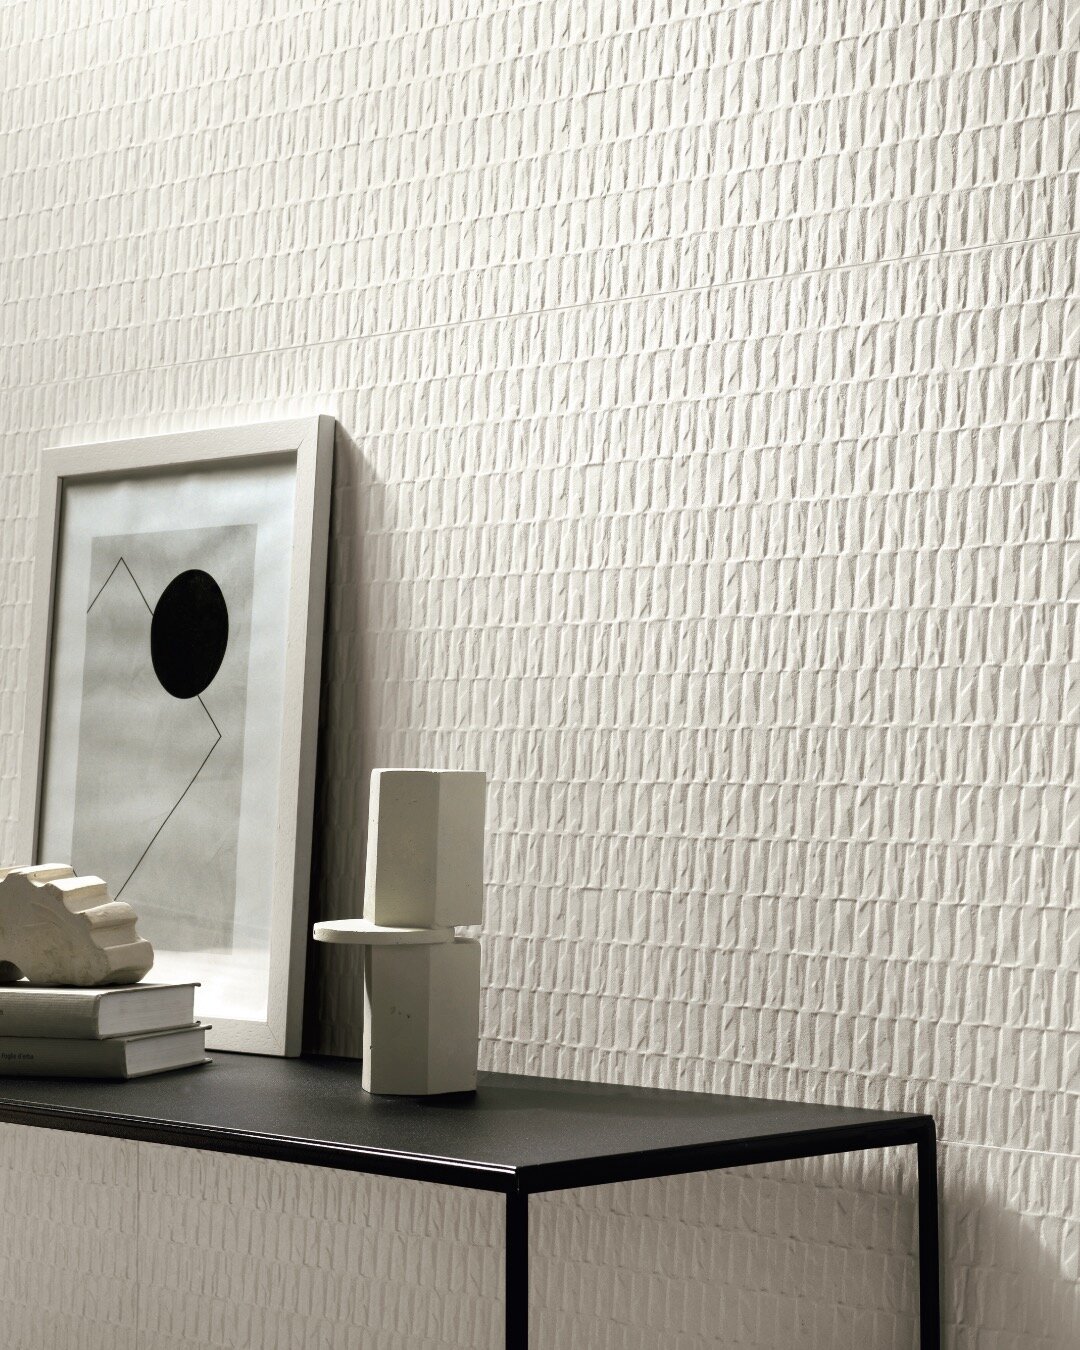 Coming soon to Julian TIle. 3D Wall Plaster - Italian Ceramic Tile. Simple white and textures of brushes, combs, and trowels compose vibrant surfaces. 
Light gives the three-dimensional expressiveness and movement creating a furnishing element with a